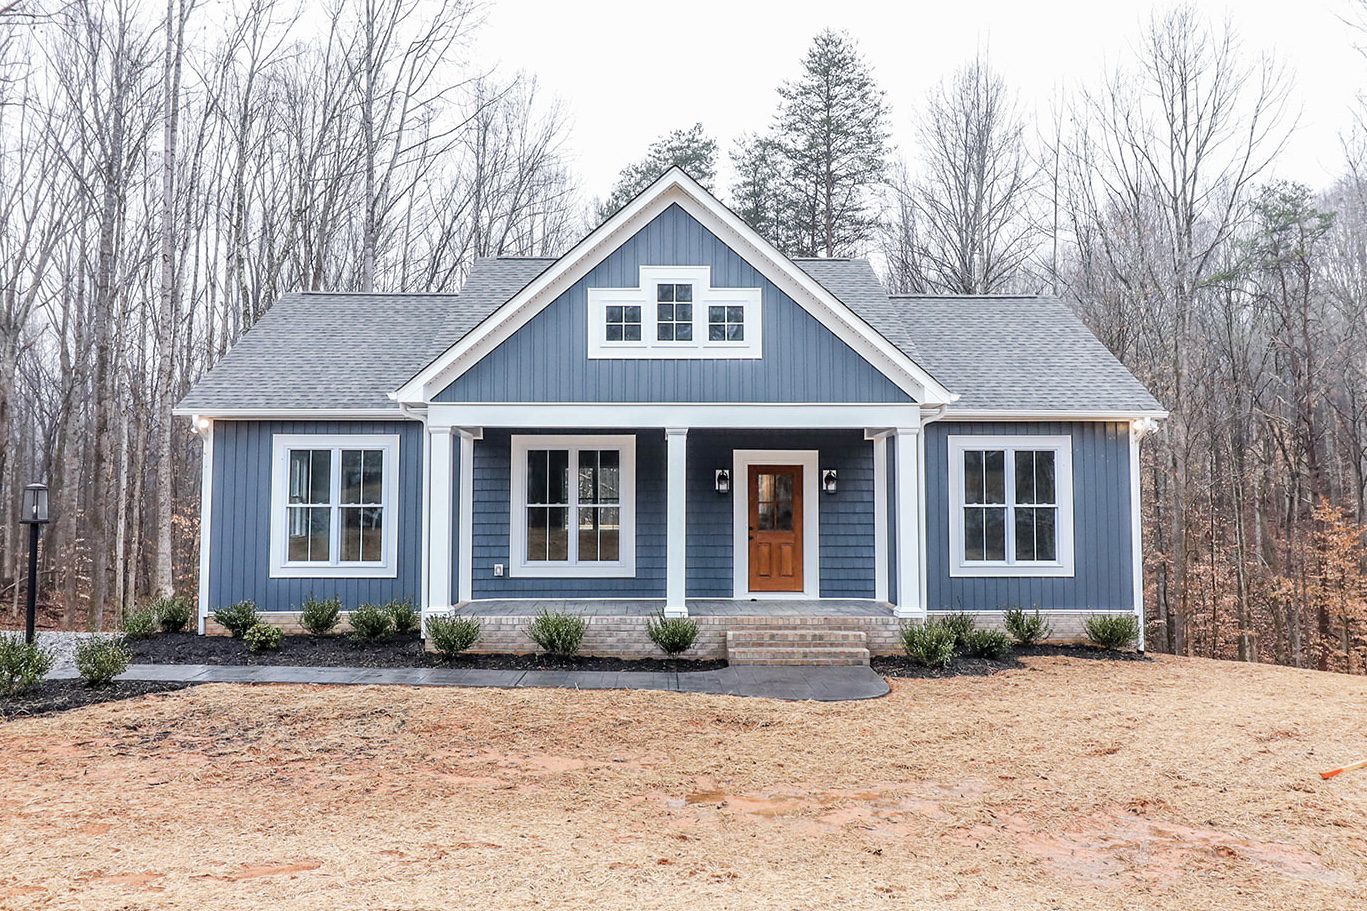 Blackstone, Farmville, Amelia, Buckingham, Dinwiddie, Fluvanna, Goochland, Louisa, Mecklenburg, Nottoway, Powhatan, New Homes, New Home Builder, New Construction, Build on Your Lot, Build a Home, Build my Home, Scottsville, South Hill,